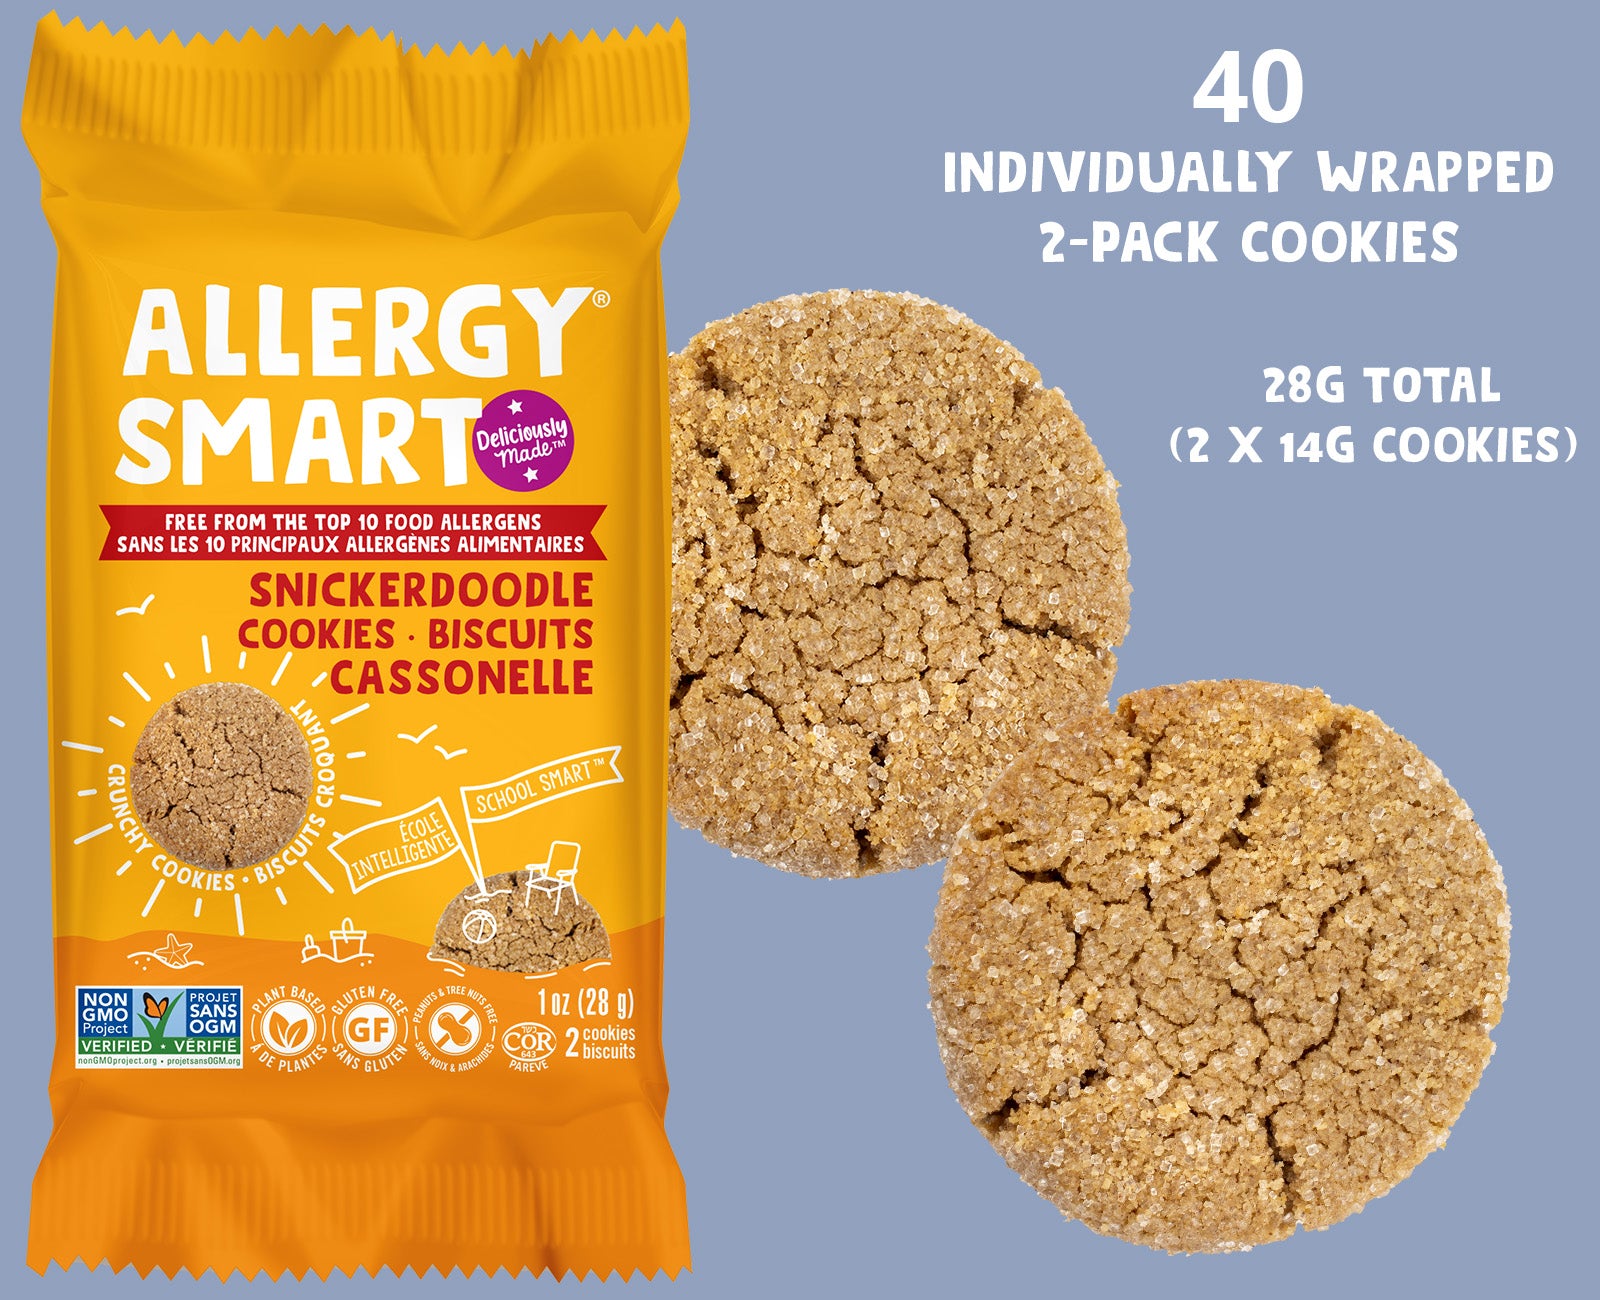 Snickerdoodle Cookies | 40 Individually Wrapped 2-Pack Cookies